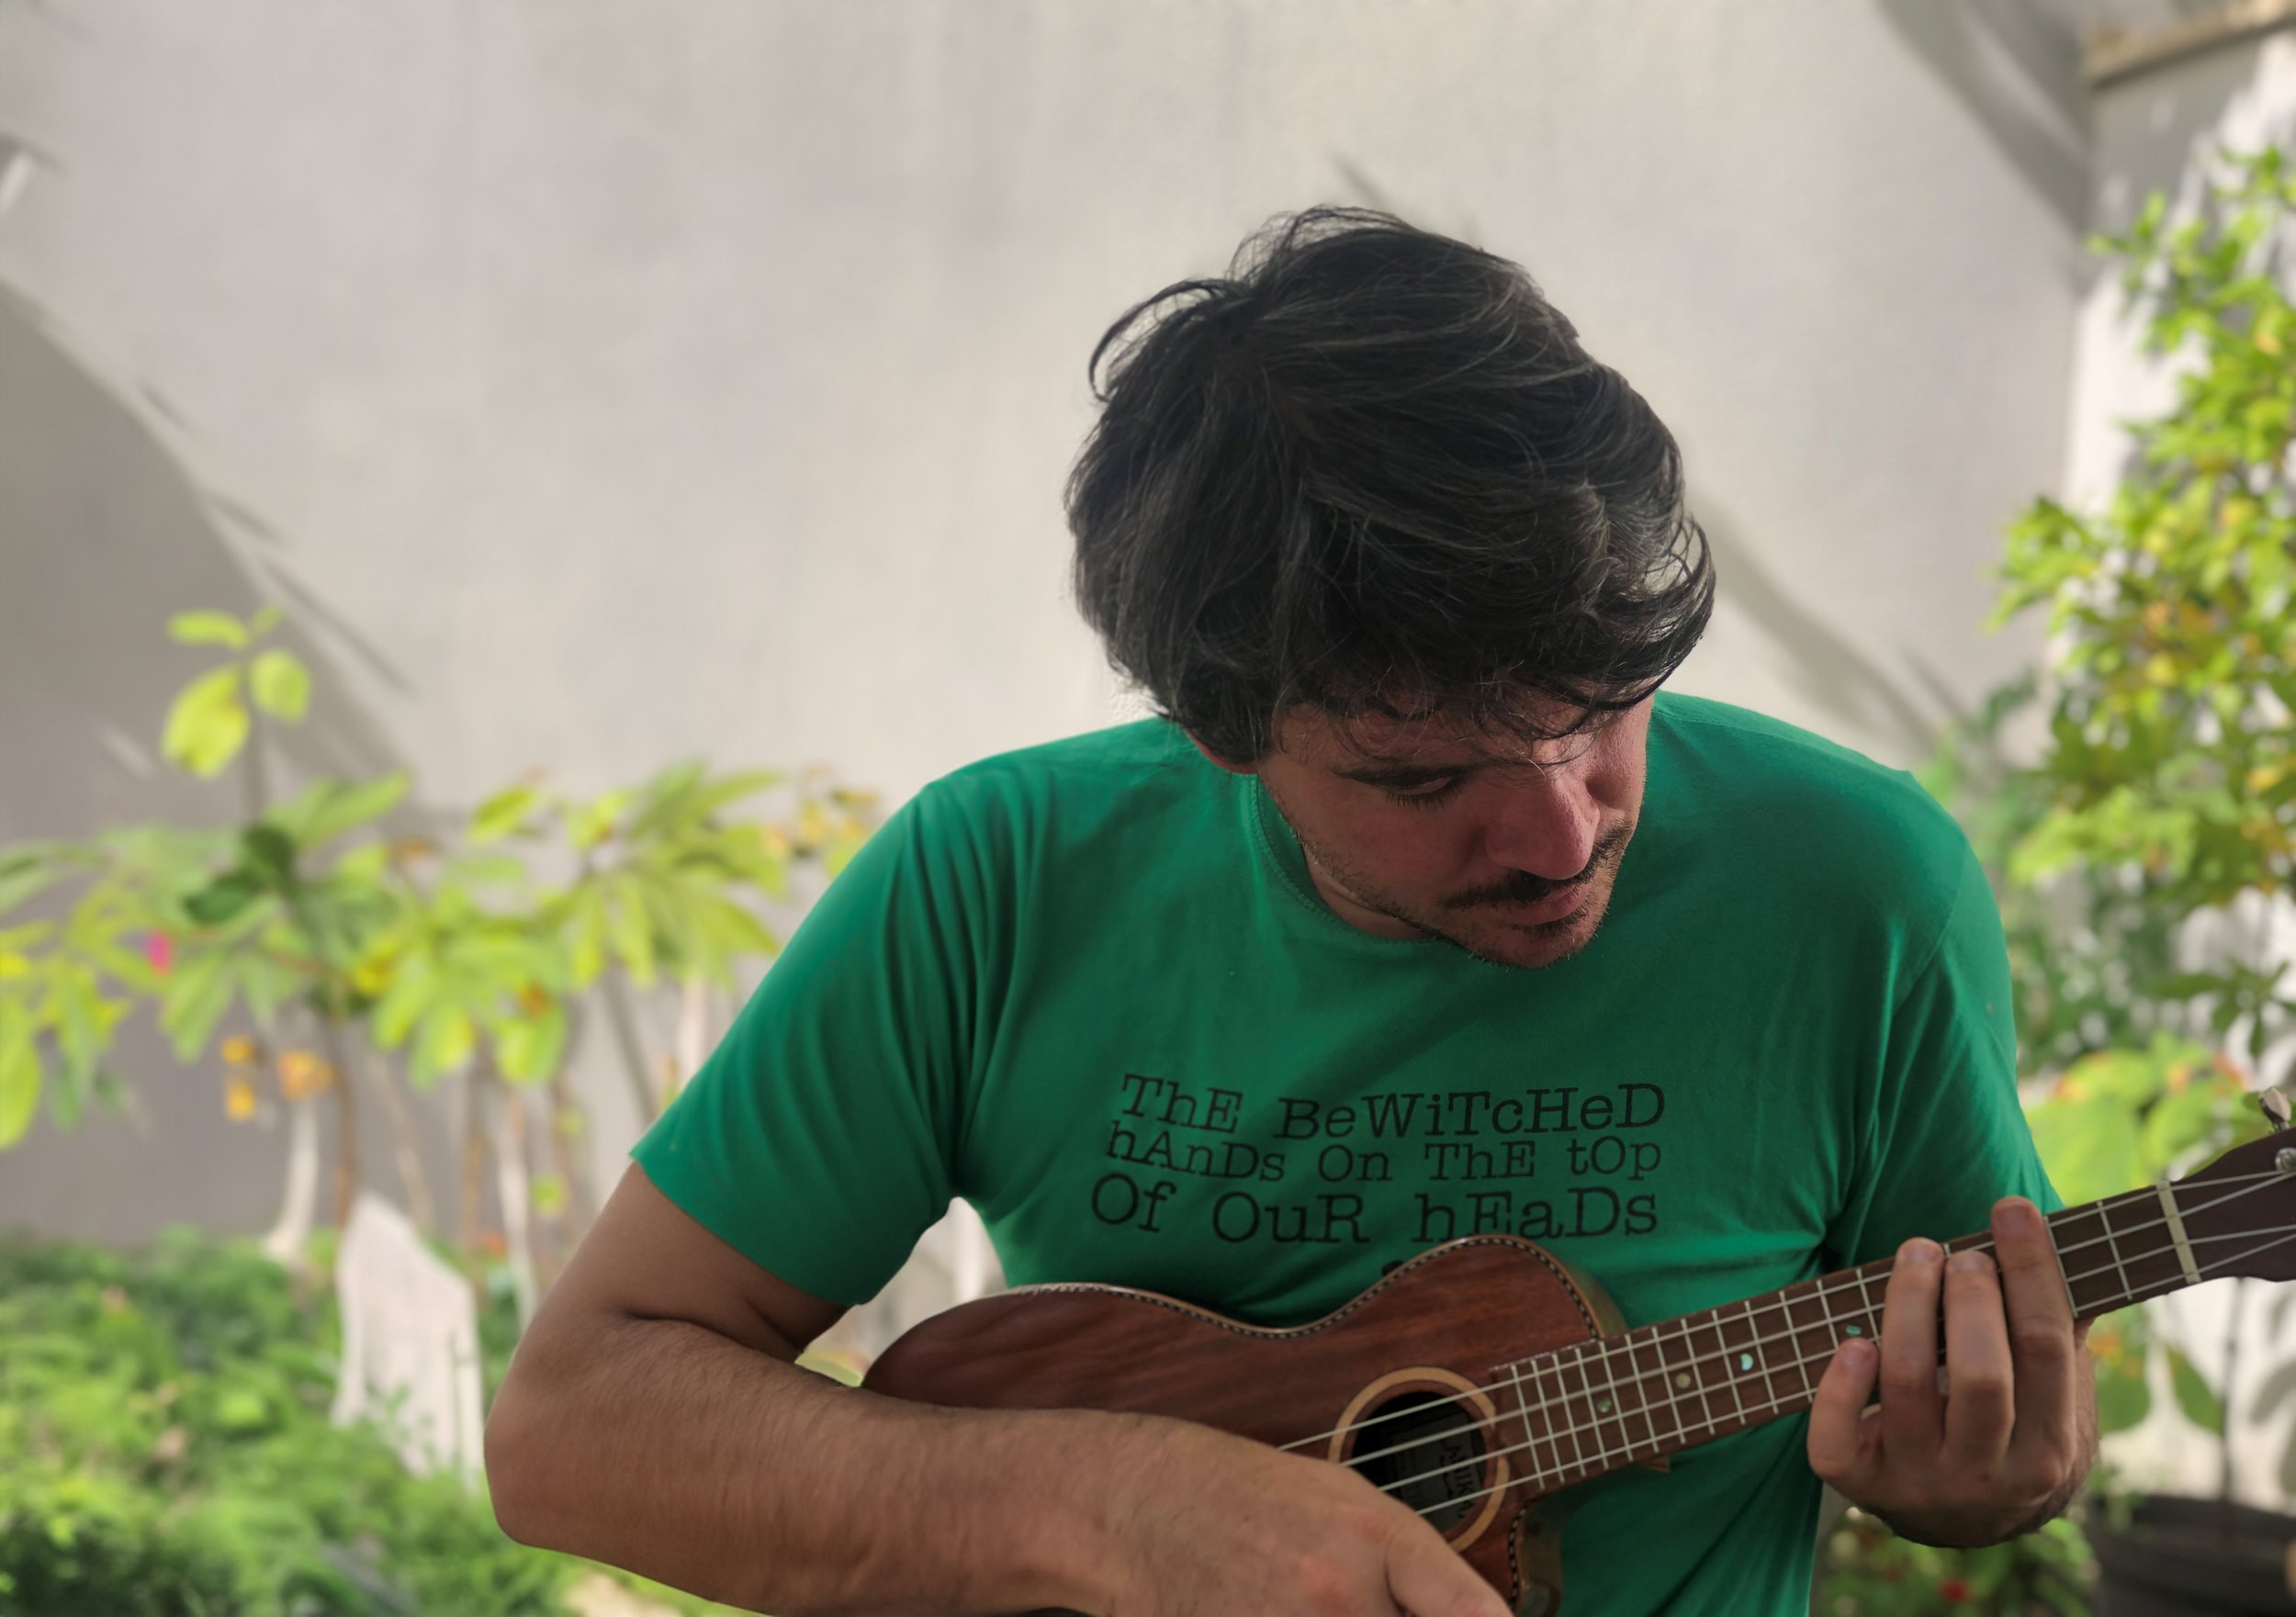 3 good reasons to learn music with the ukulele, according to Aliocha Lauwers